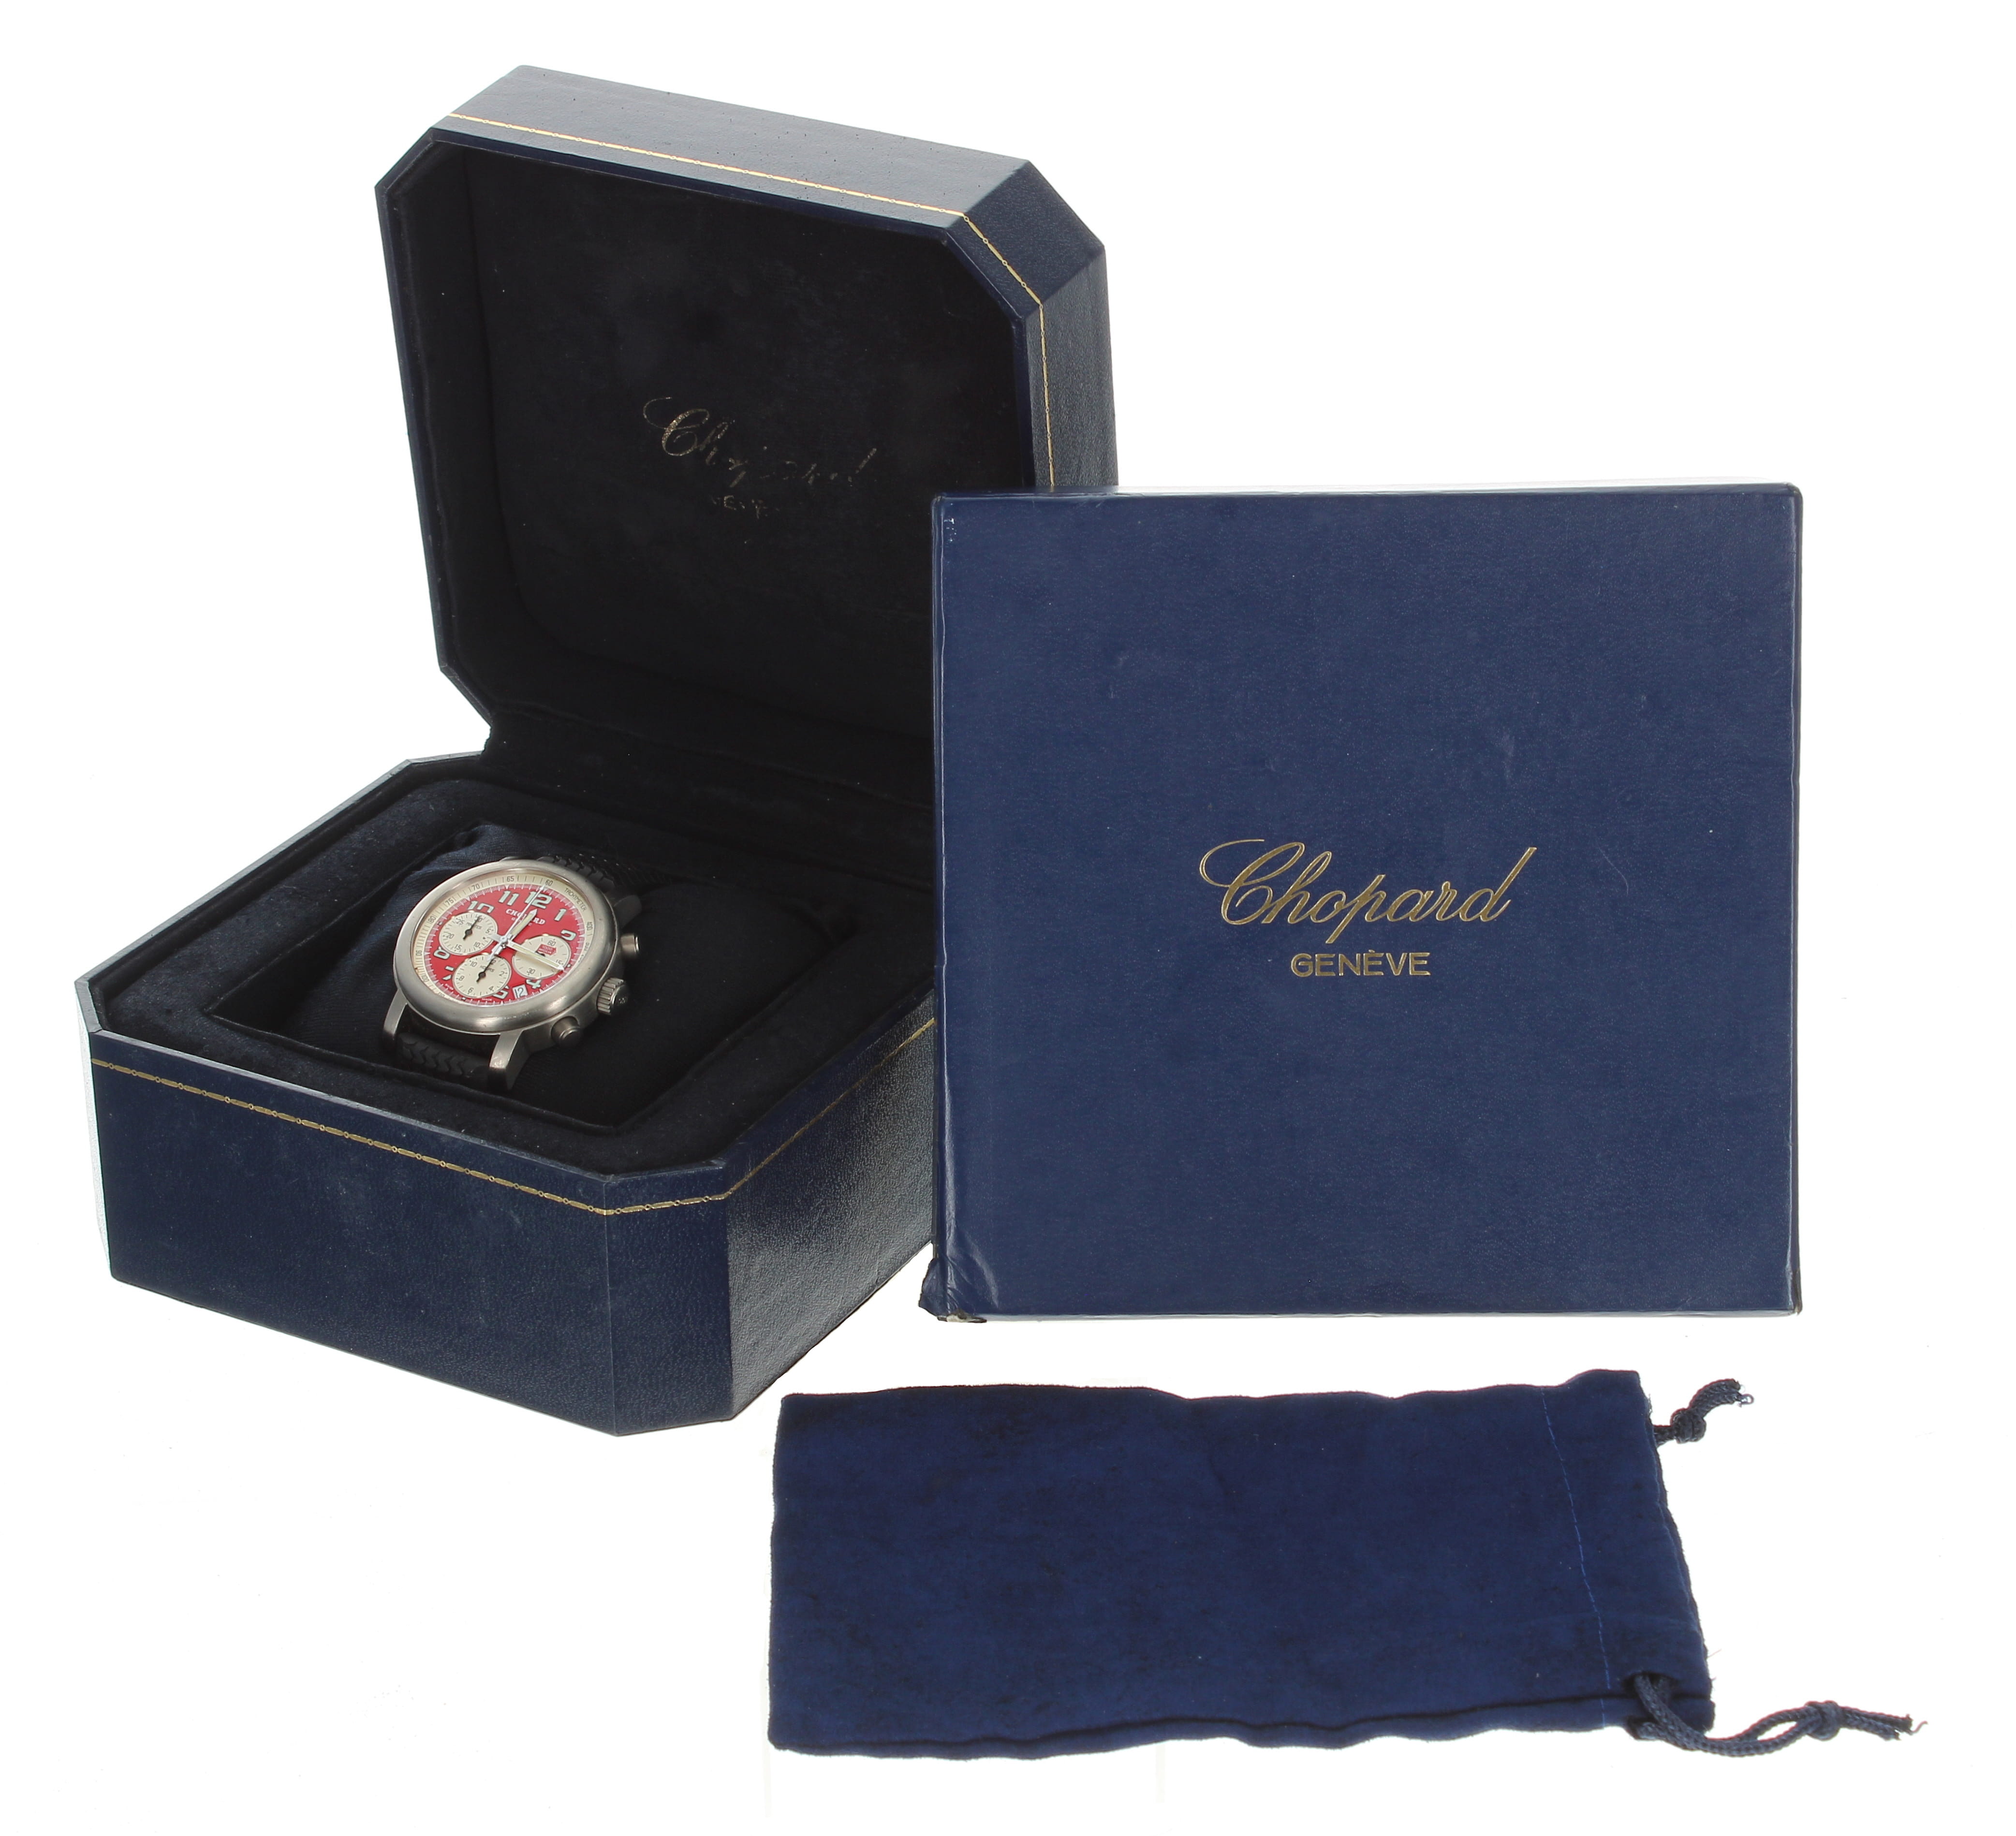 Chopard Mille Miglia MM Rosso Limited Edition Chronograph automatic titanium gentleman's wristwatch, - Image 3 of 3